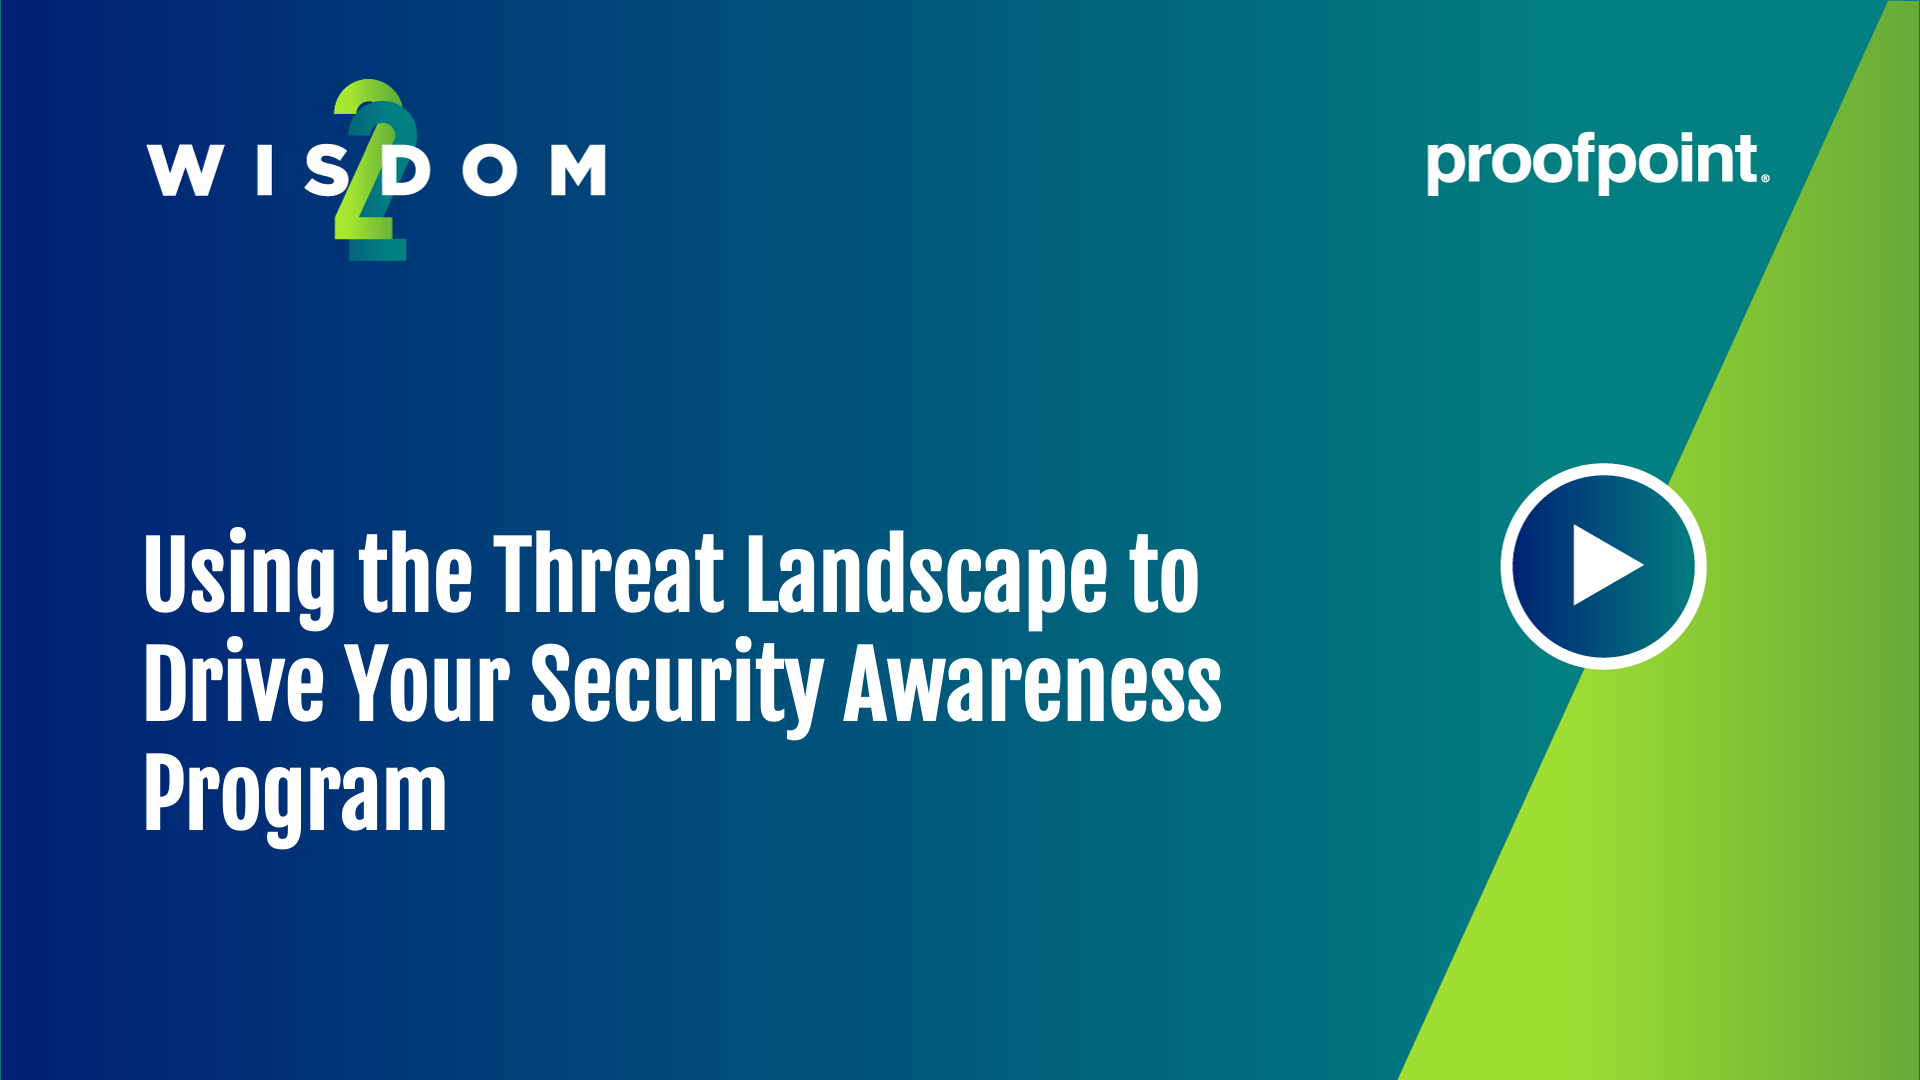 Using the Threat Landscape to Drive Your Security Awareness Program